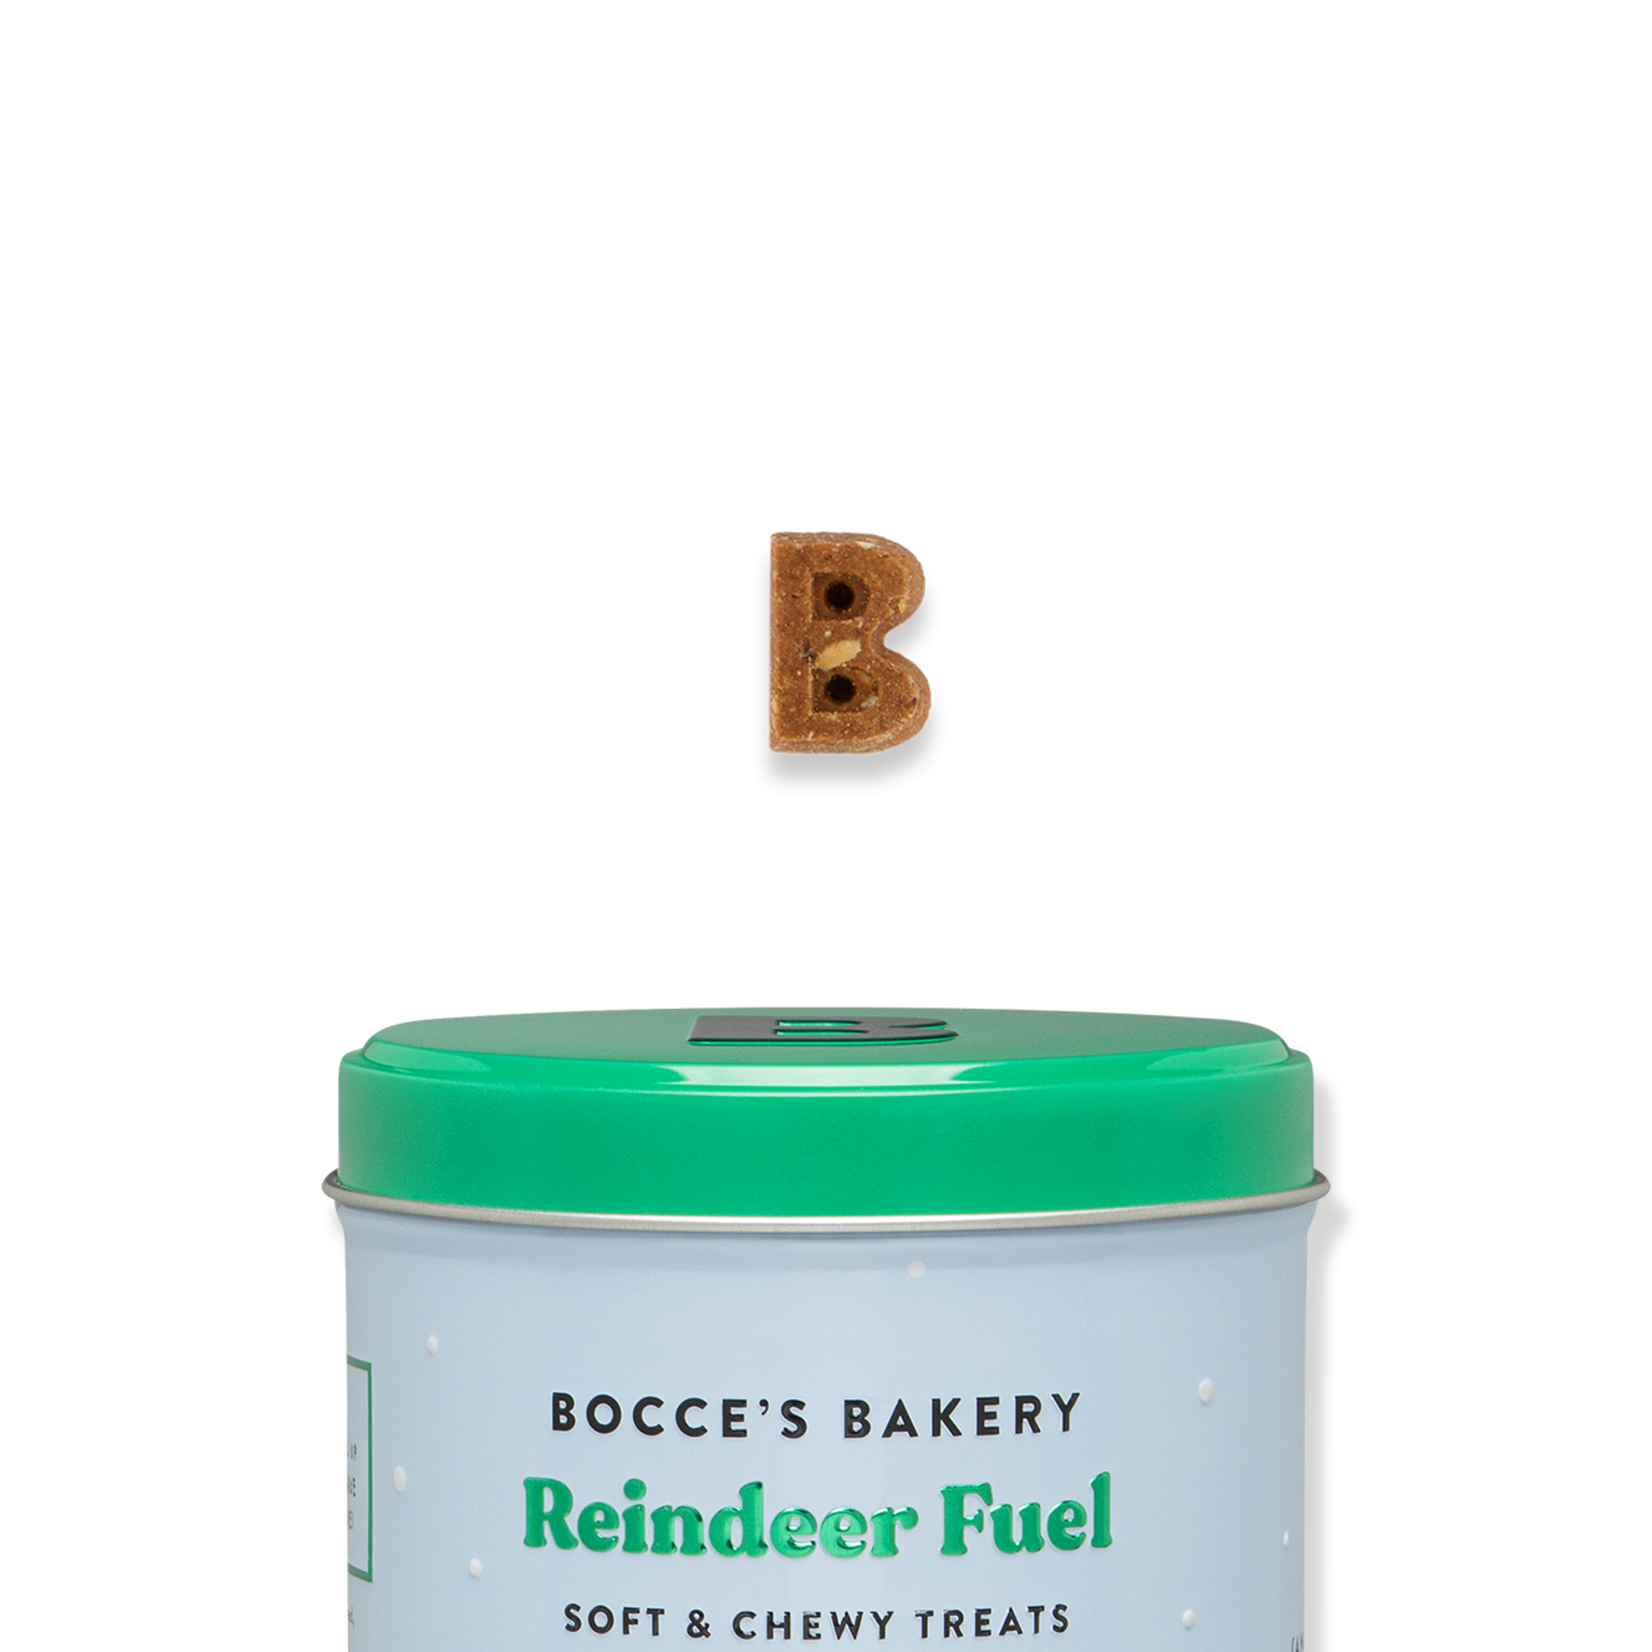 Bocce’s Bakery Reindeer Fuel Soft & Chewy Treats Tin